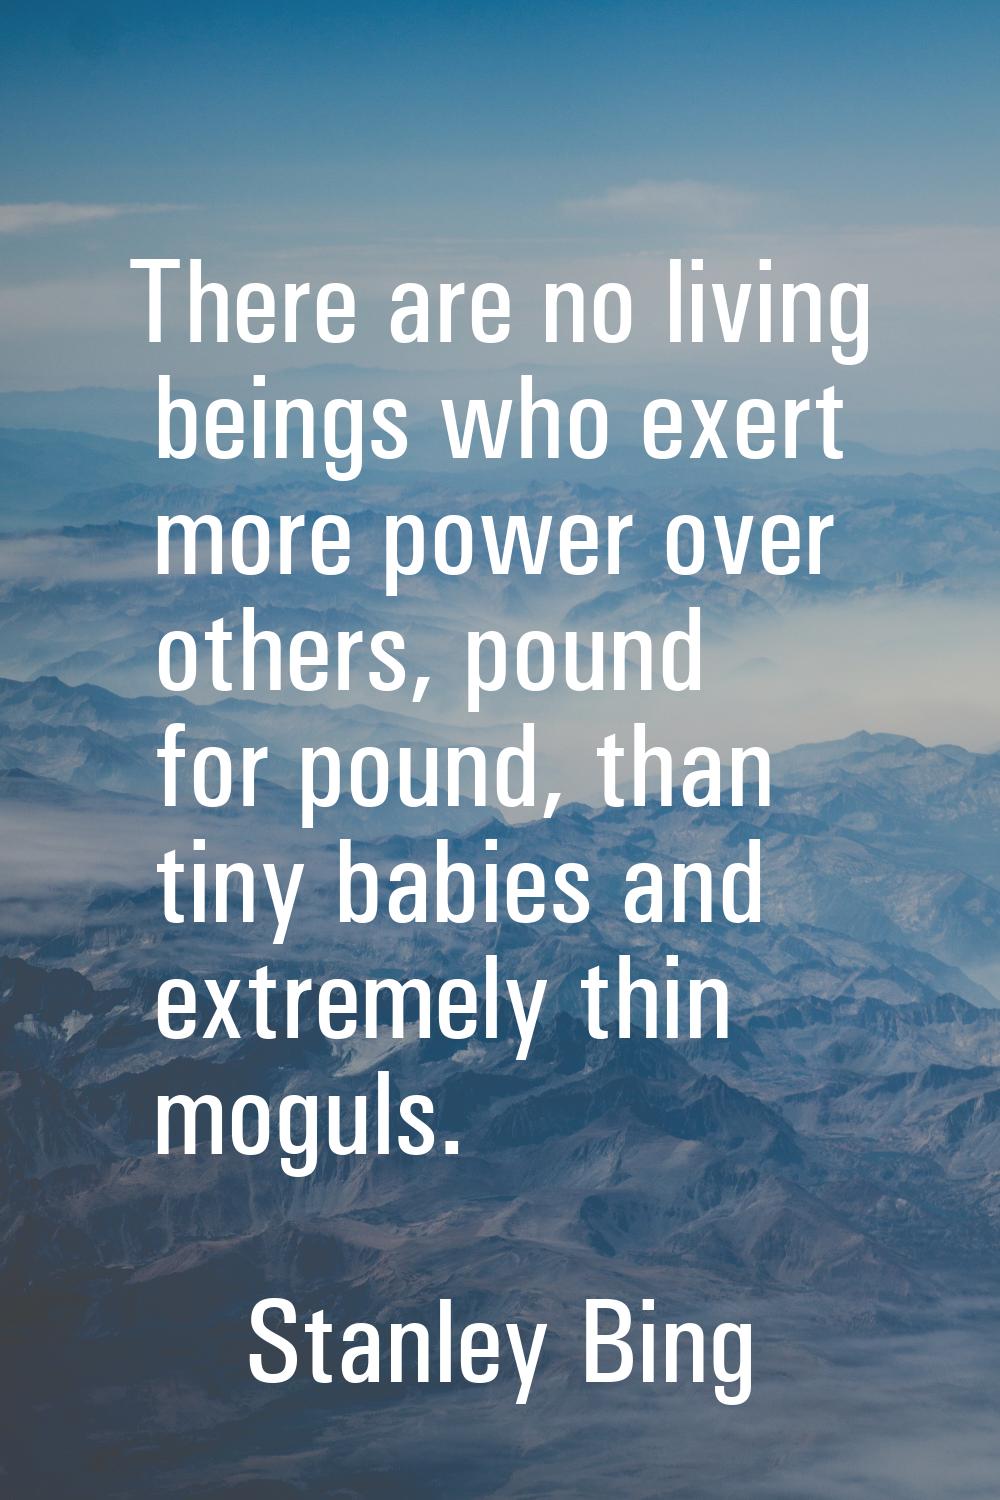 There are no living beings who exert more power over others, pound for pound, than tiny babies and 